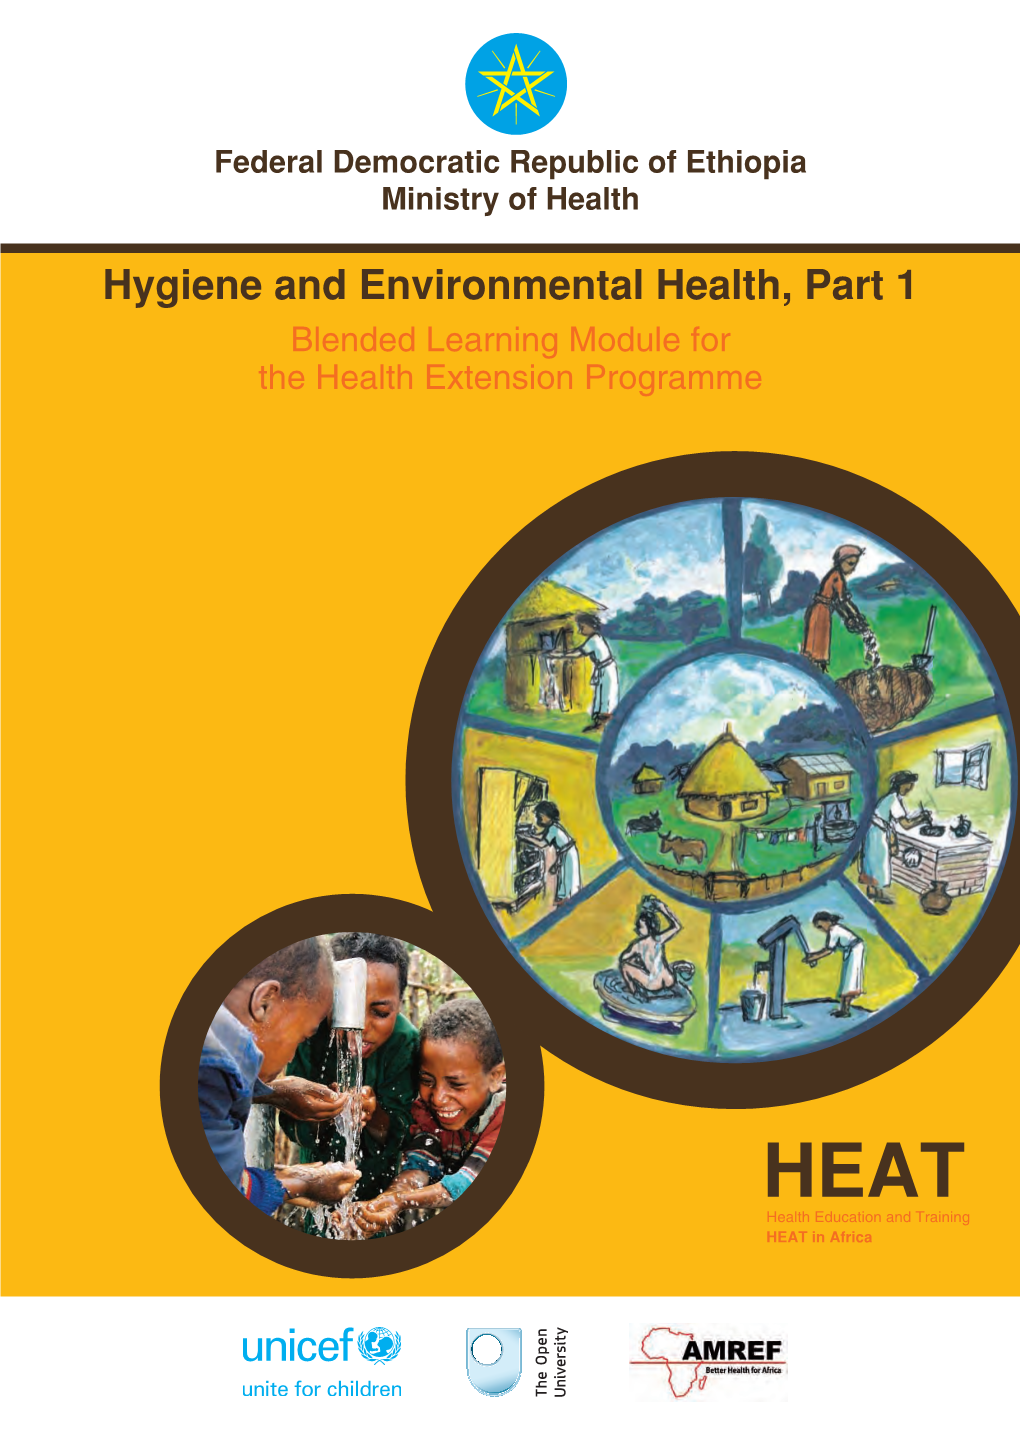 Hygiene and Environmental Health, Part 1 Blended Learning Module for the Health Extension Programme